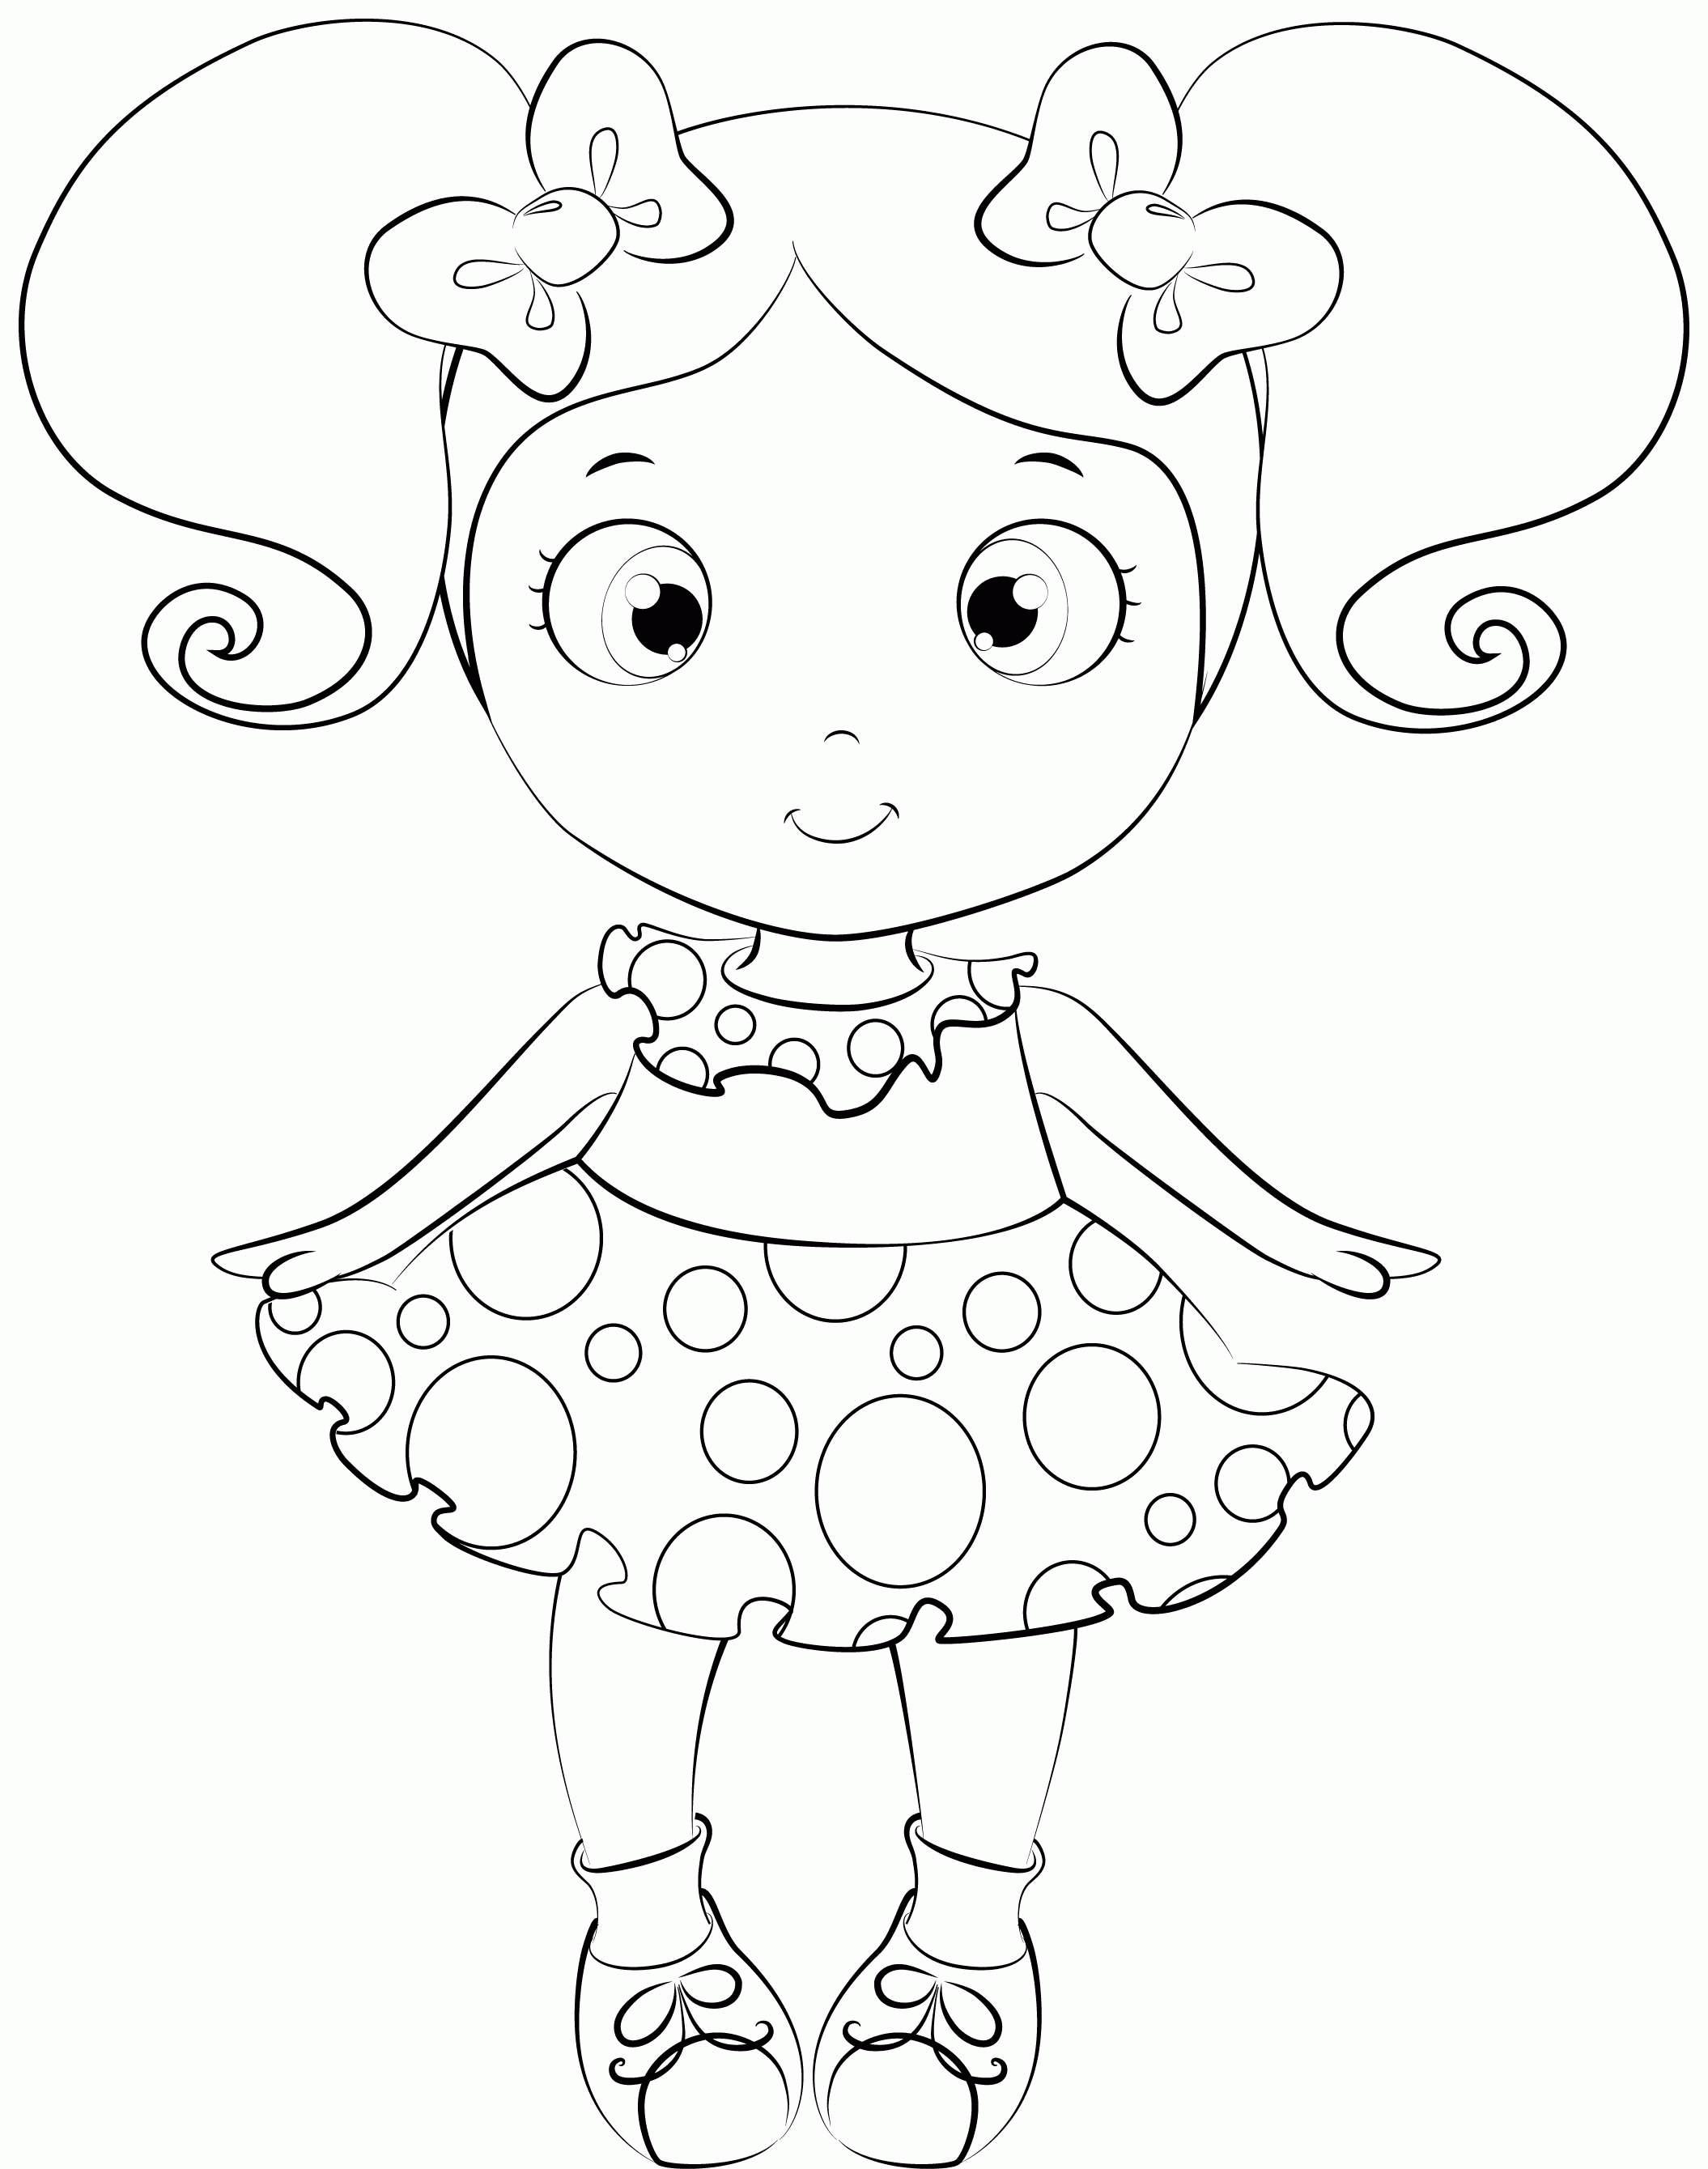 Coloring page outline doll toy with example Vector Image